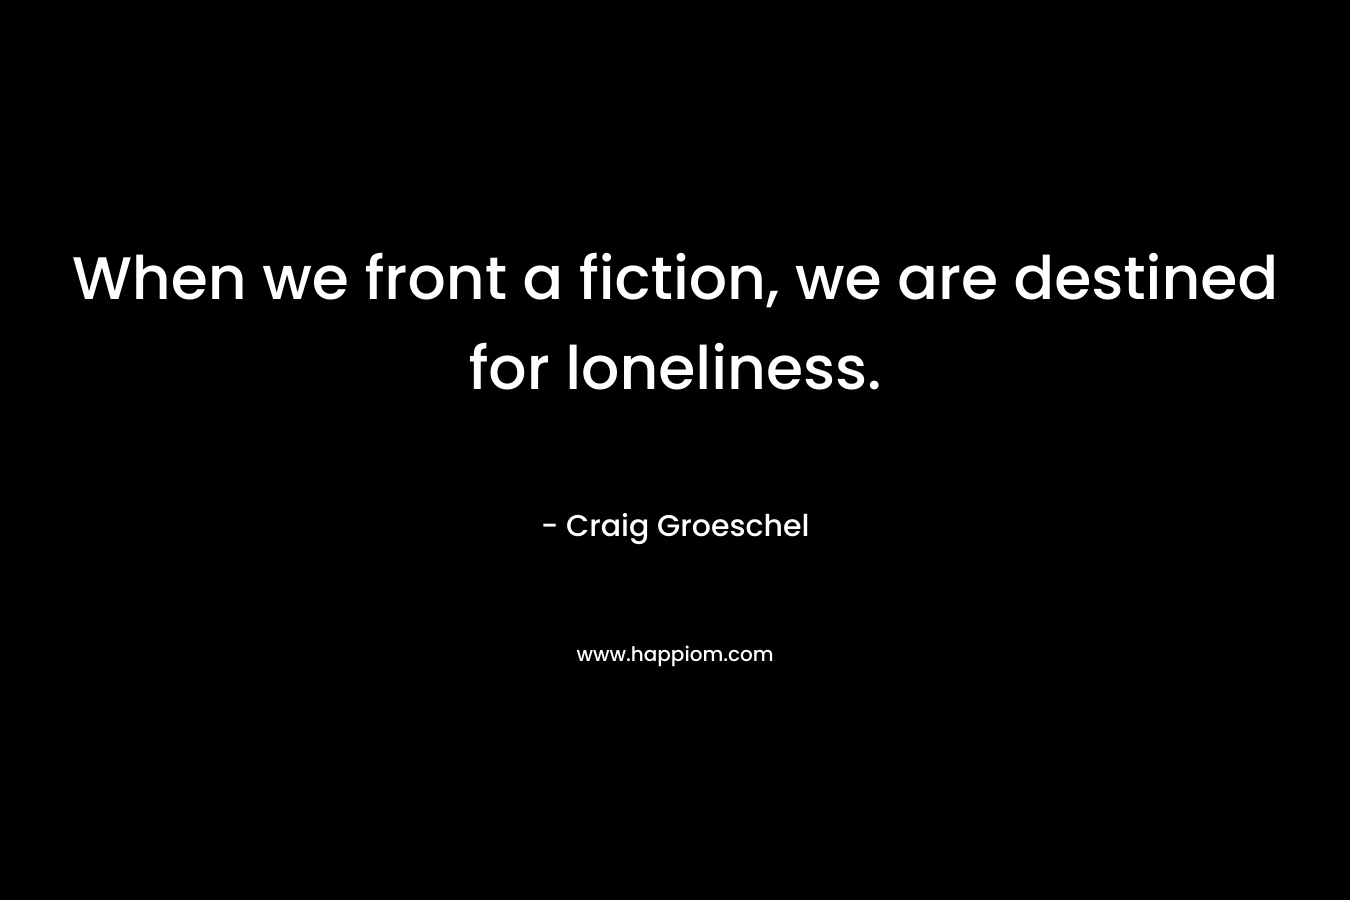 When we front a fiction, we are destined for loneliness.